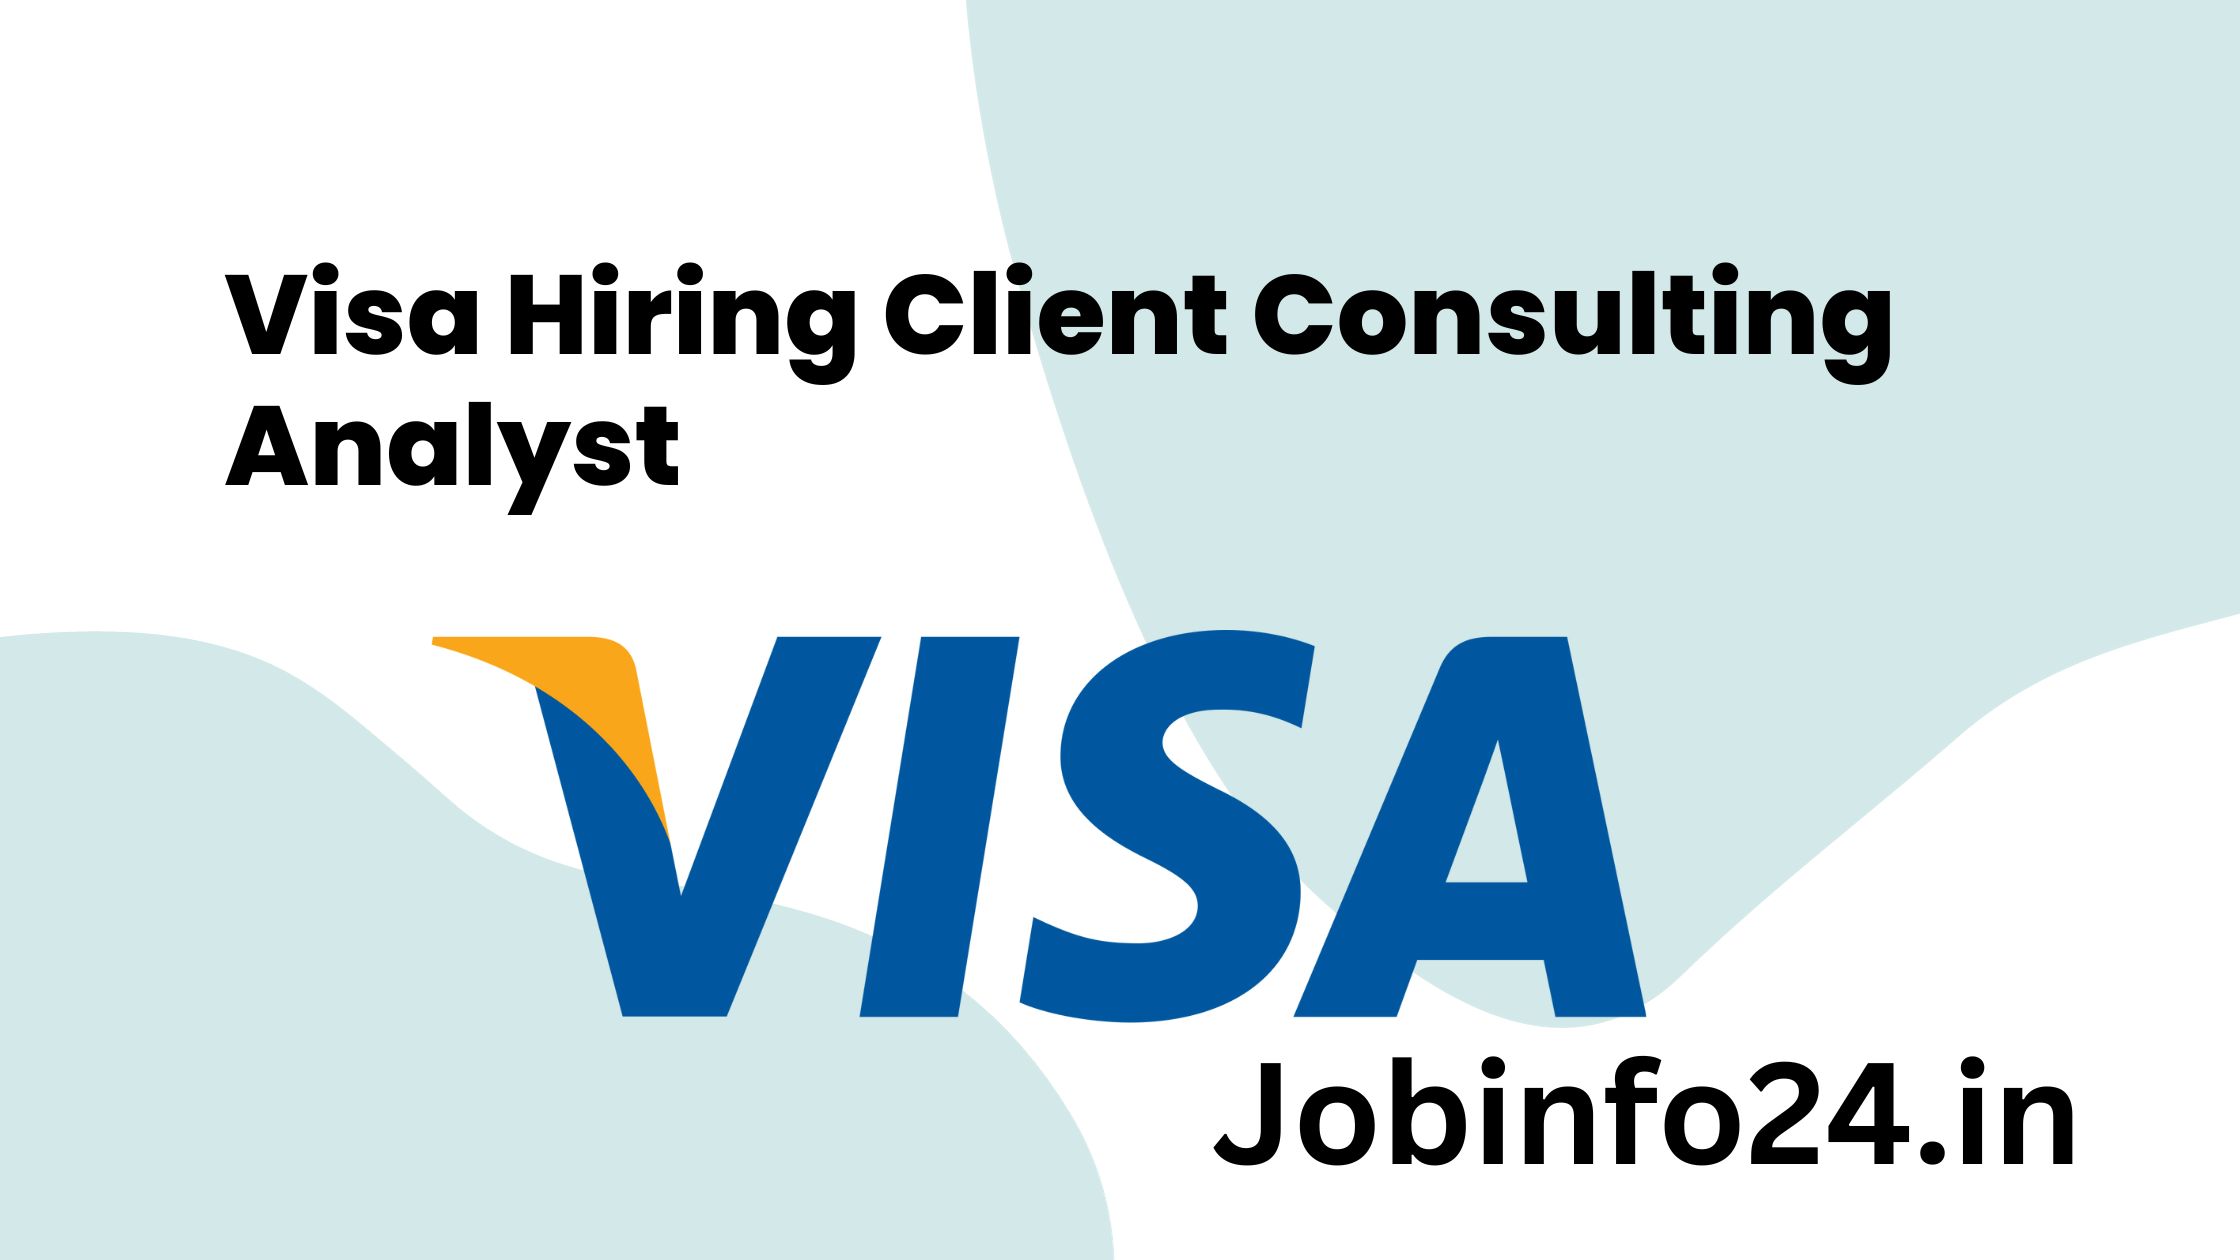 Visa Hiring Client Consulting Analyst